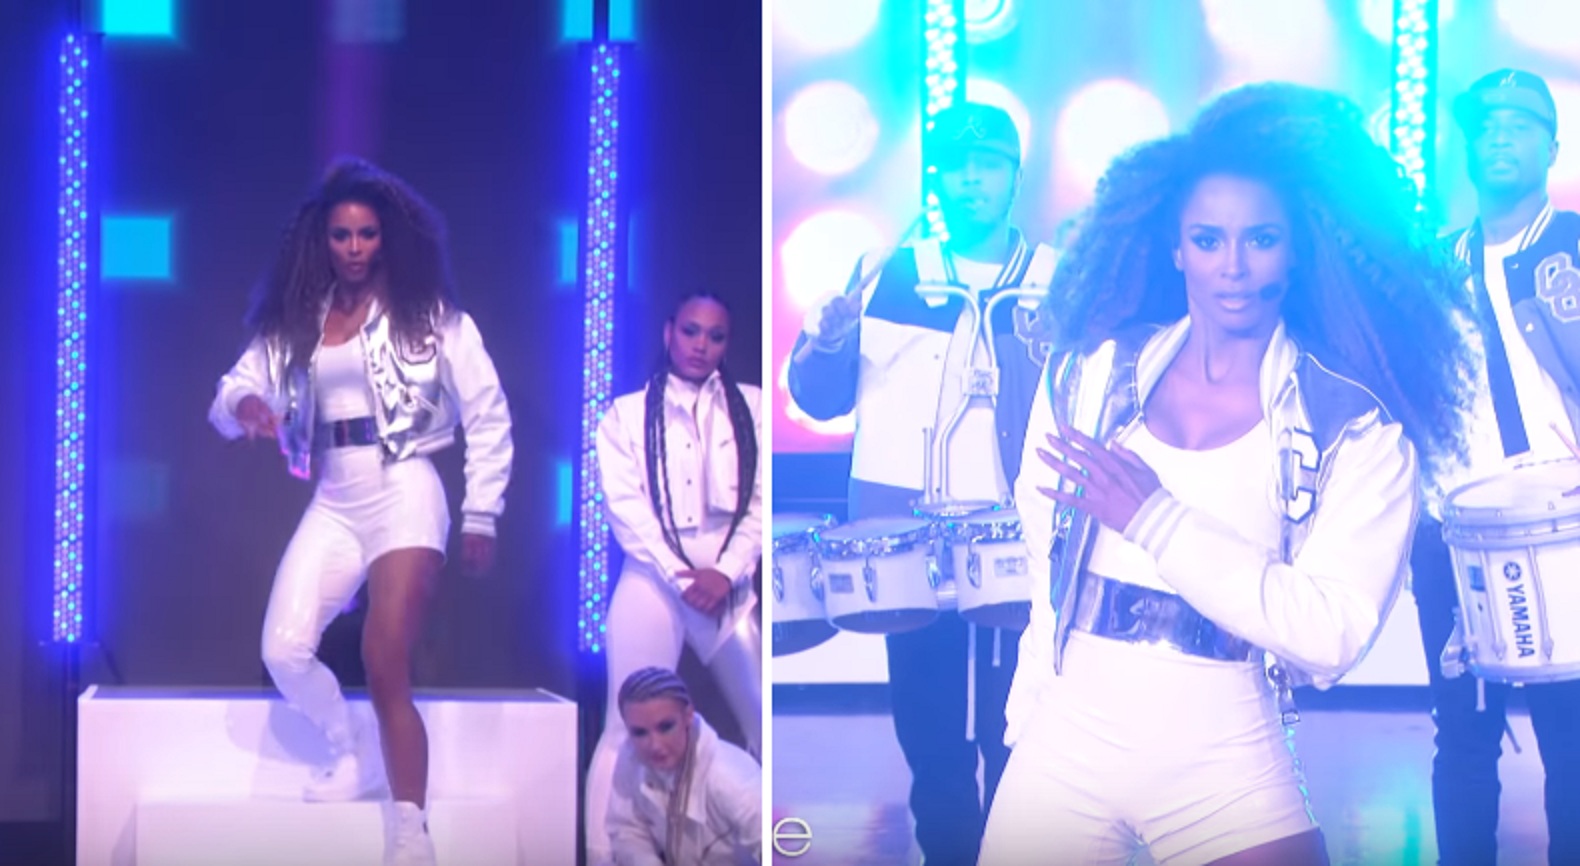 Watch: Ciara Takes Over Ellen Show with ‘Level Up/Dose’ Medley Performance!